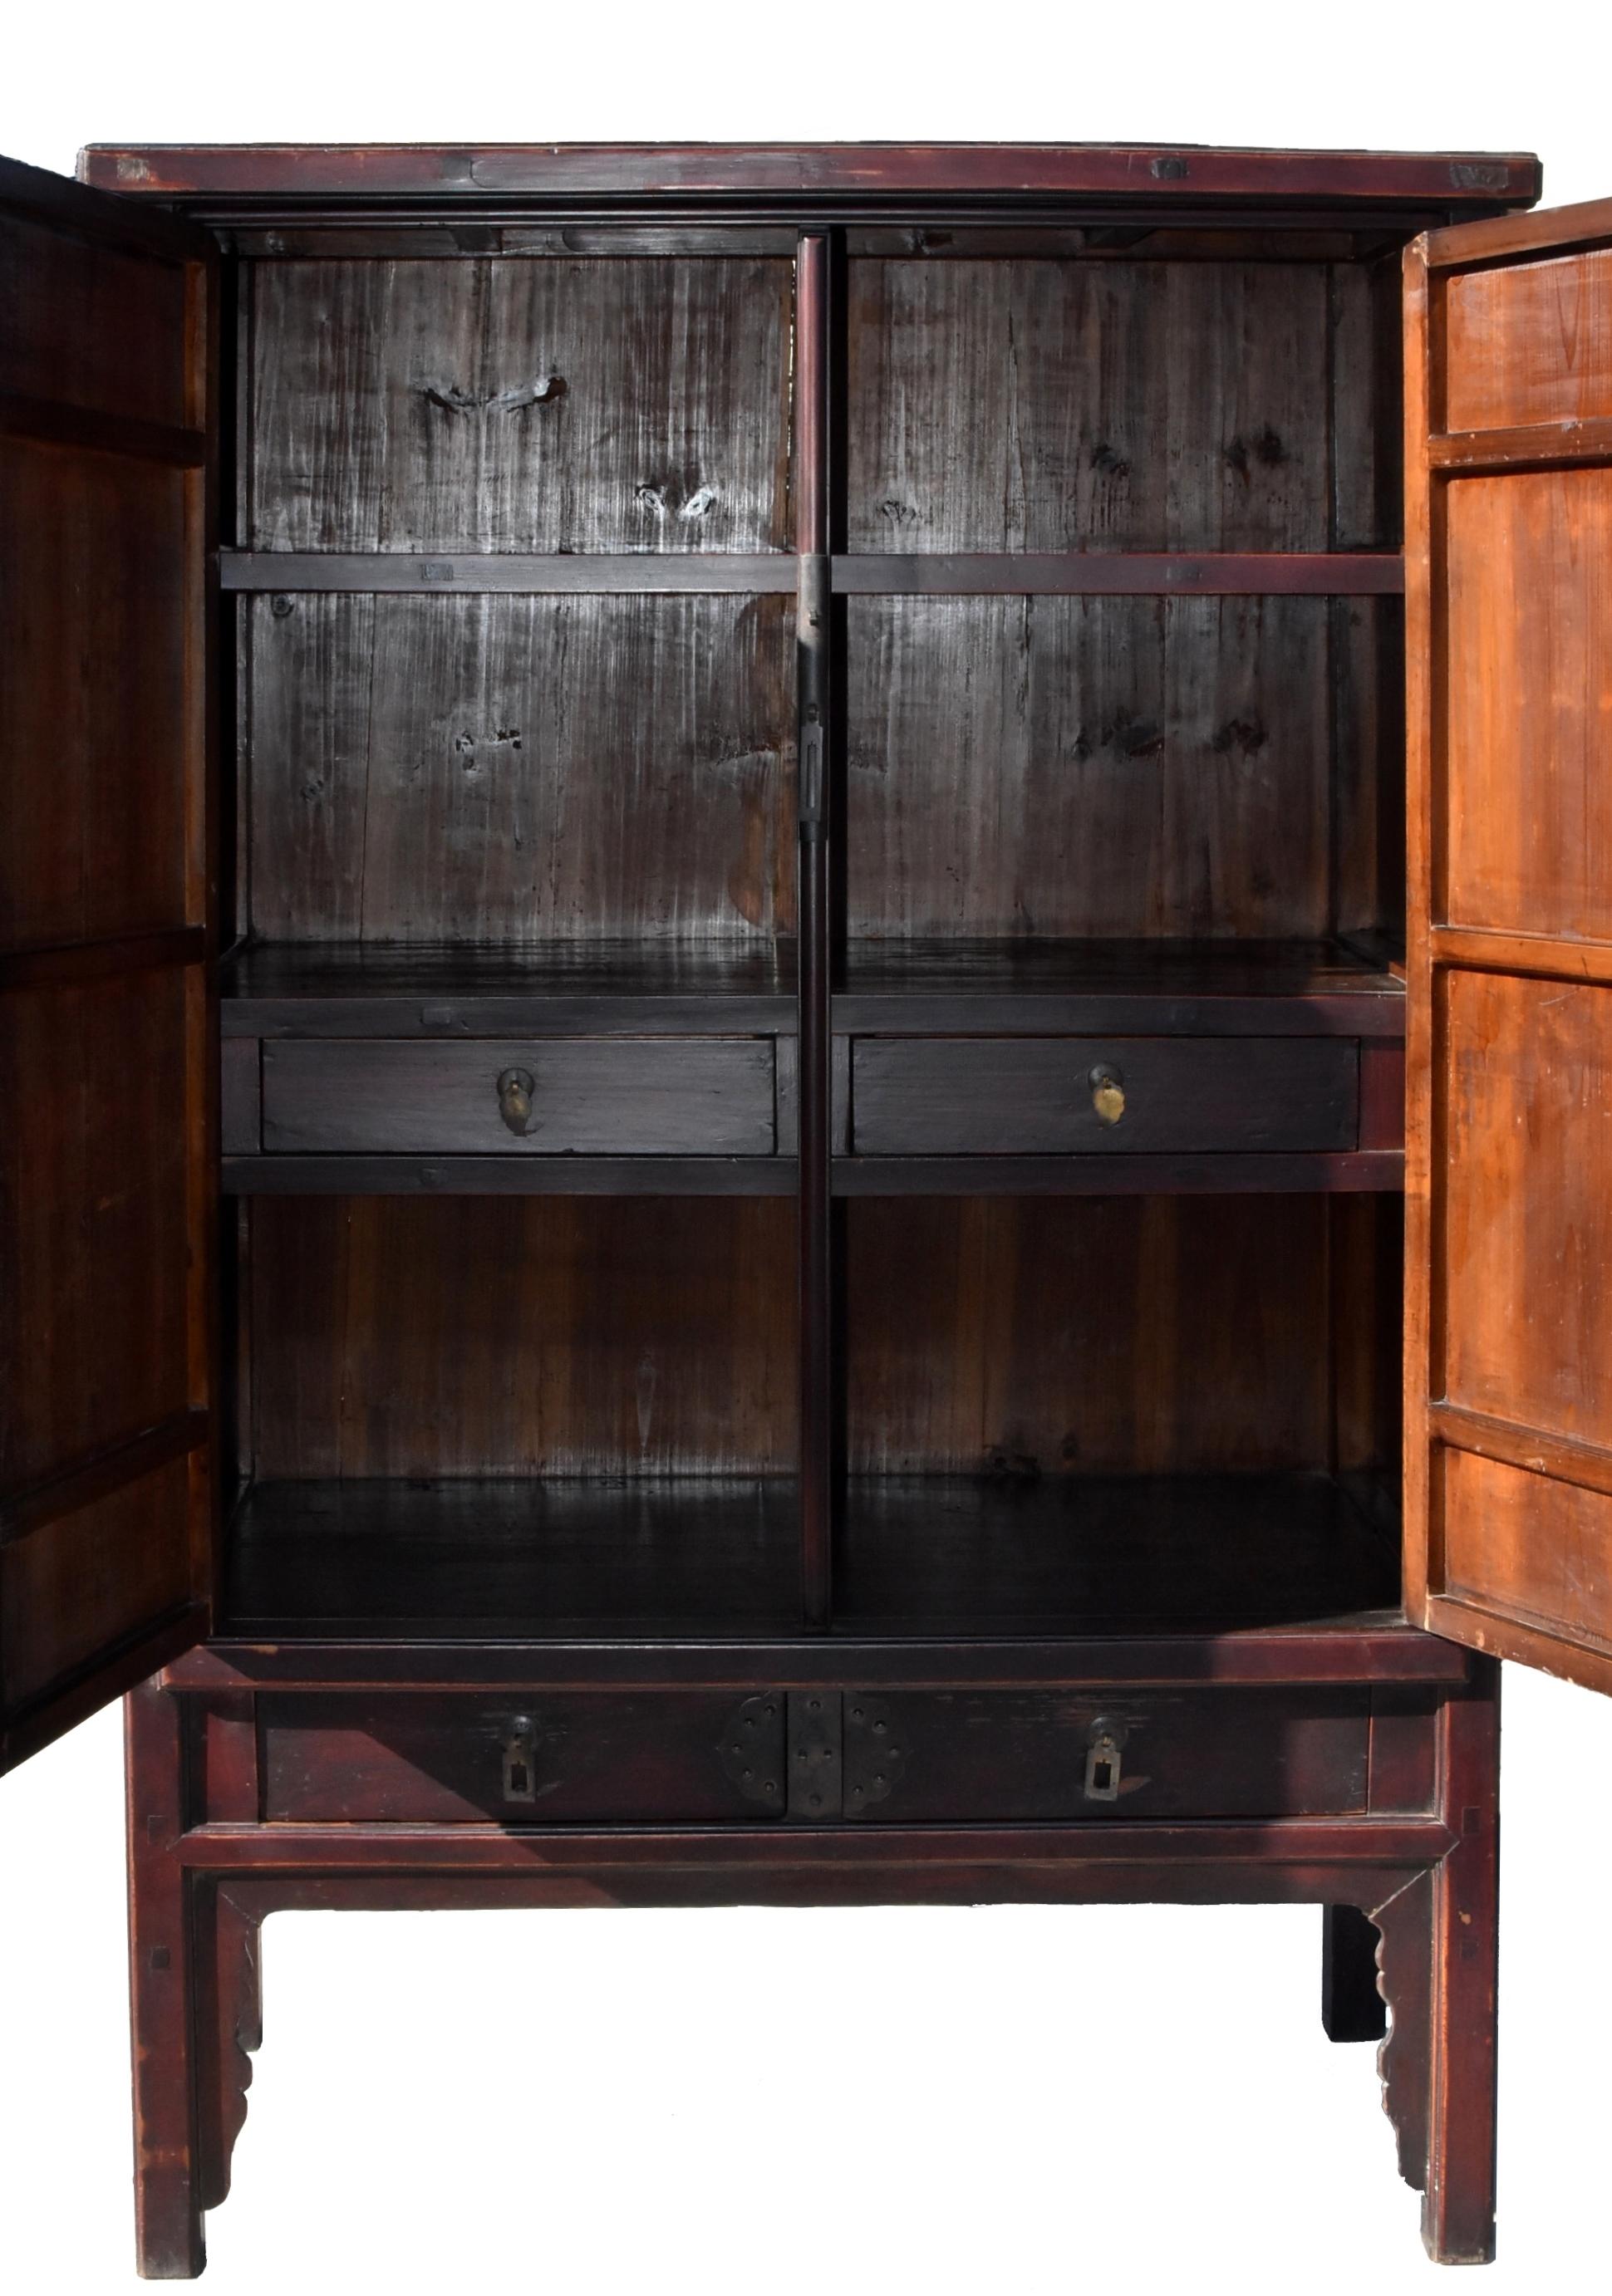 A beautiful, Ming dynasty style scholar's cabinet. The doors and side panels are all solid single boards set with mitered, tenon and mortise construction. Two exterior and interior drawers and a removable shelf above an apron and curved spandrels.